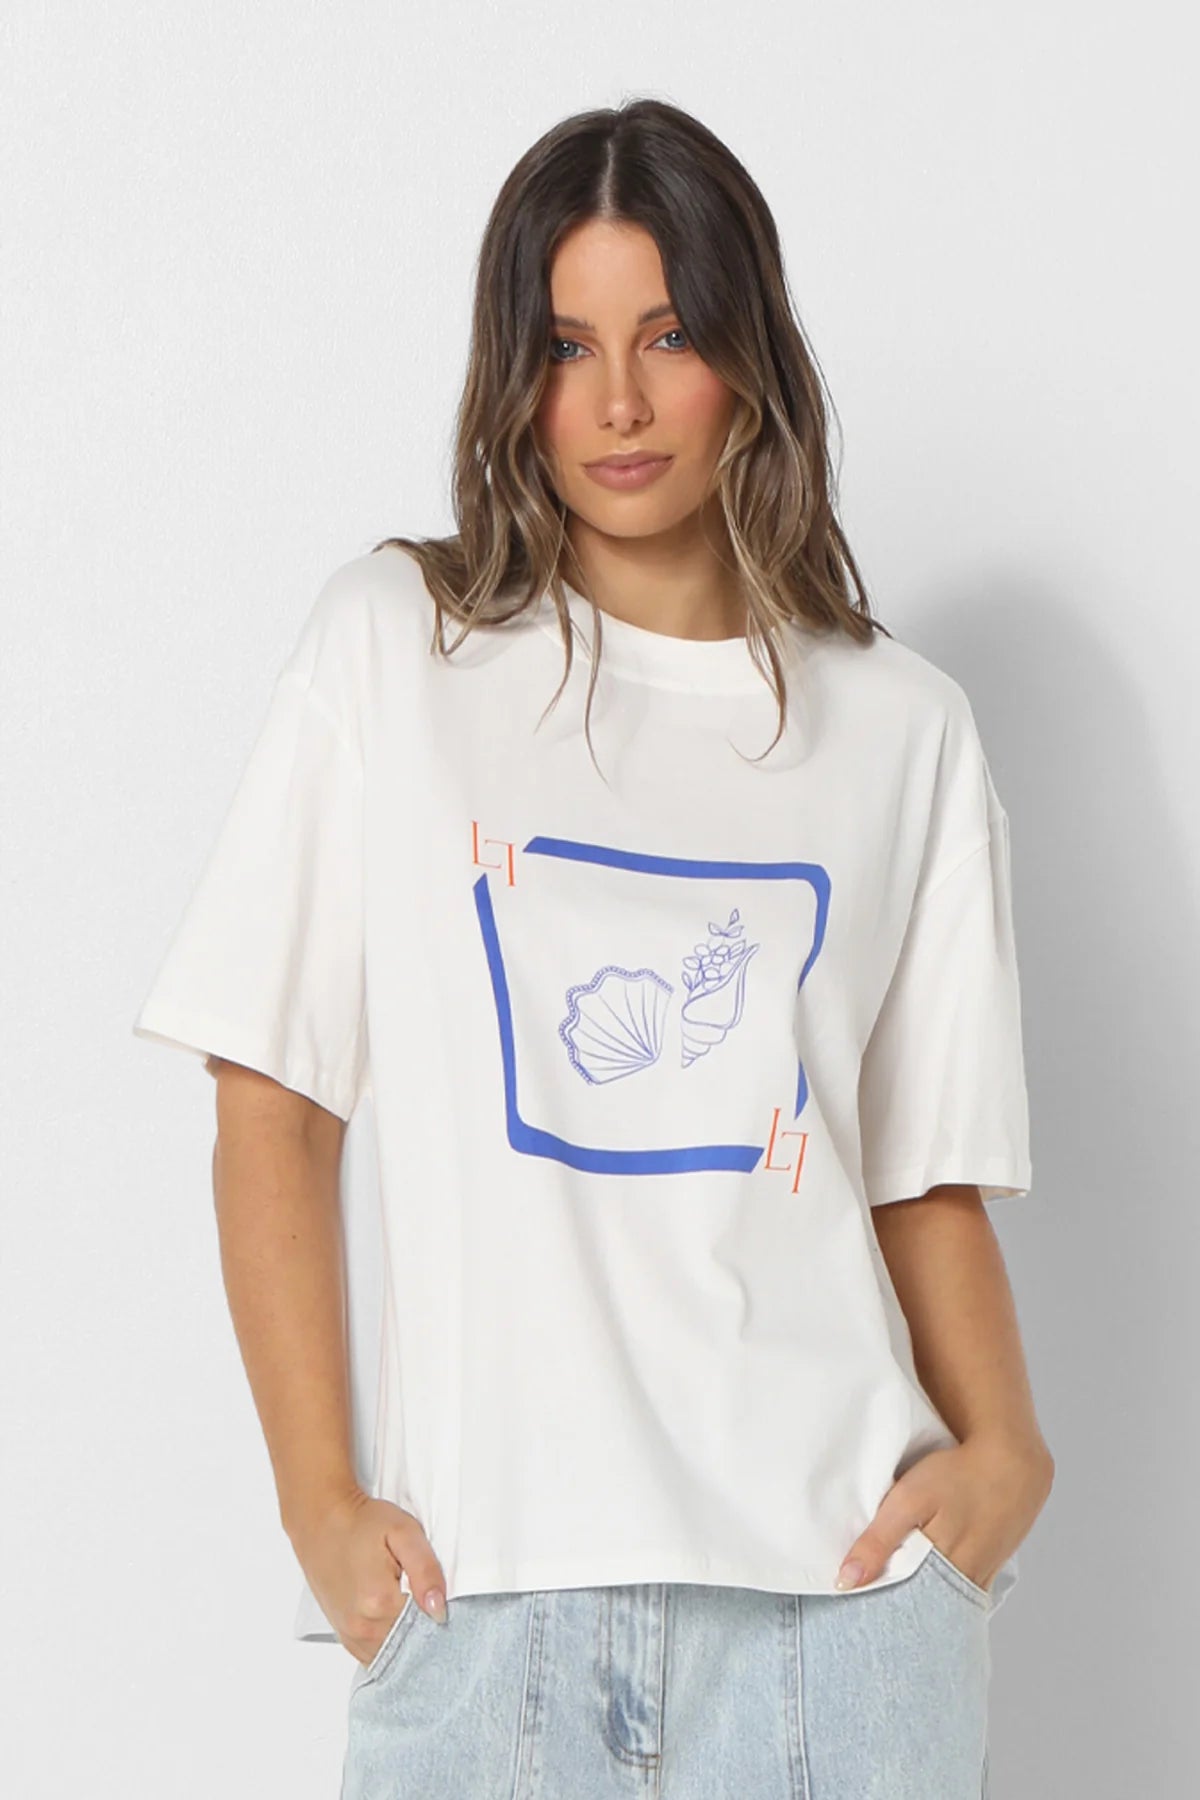 Lost in Lunar By the Sea Tee White